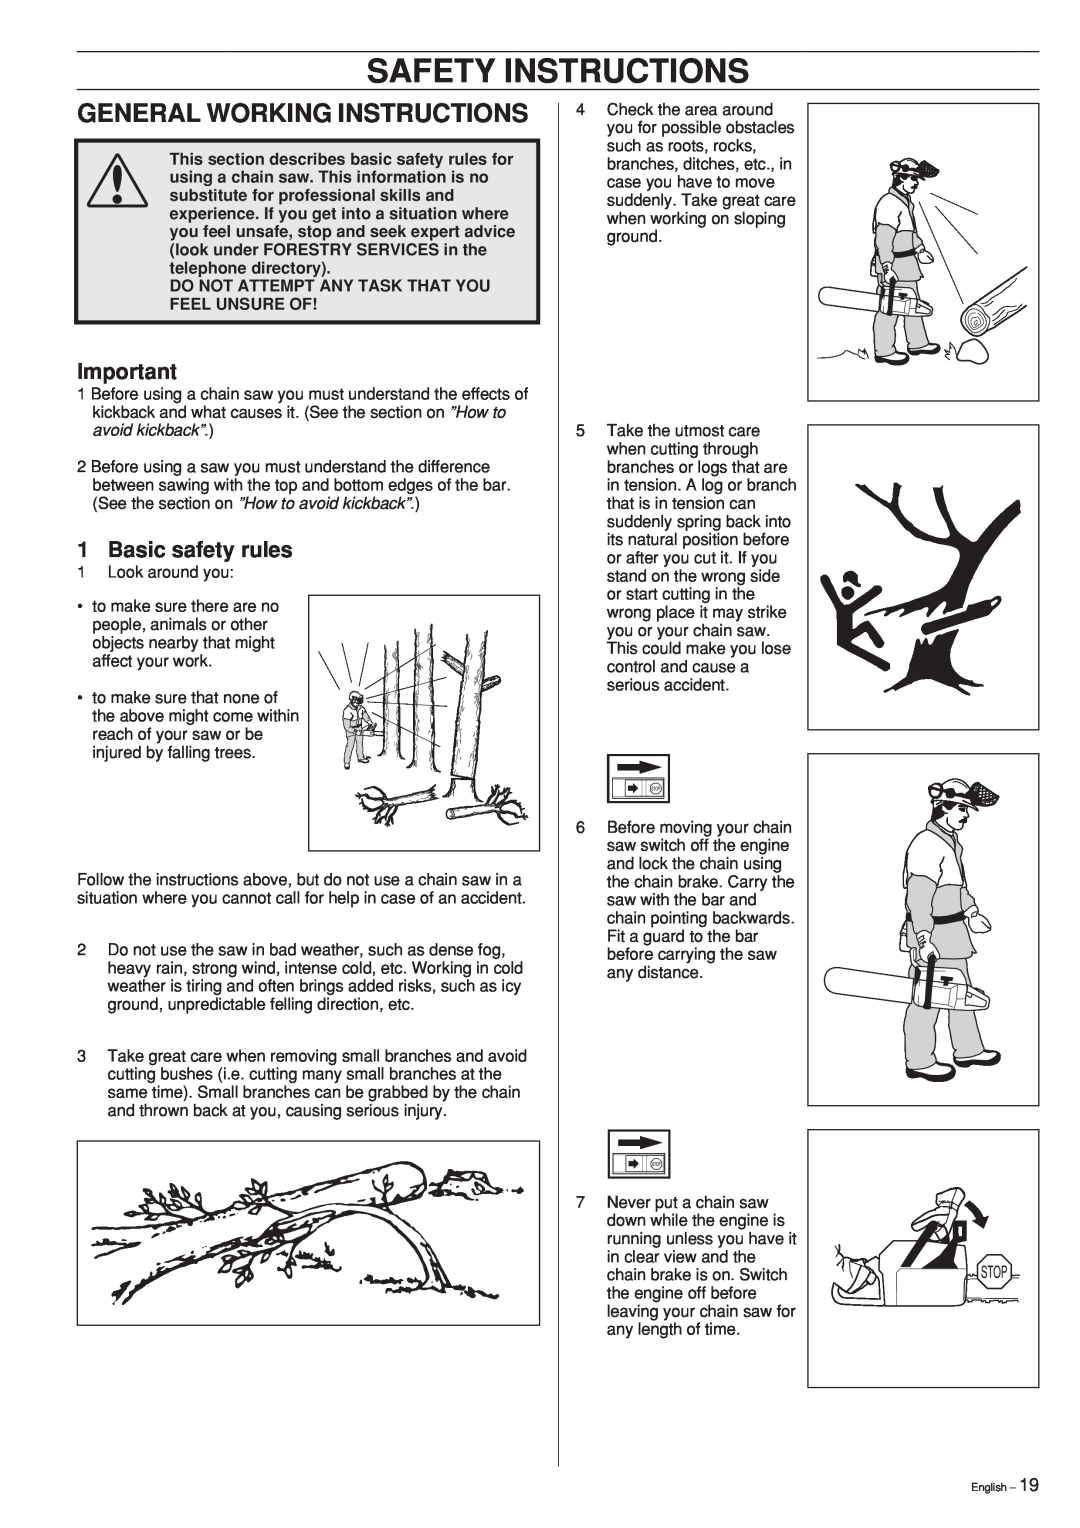 Husqvarna 55 manual Safety Instructions, General Working Instructions, Basic safety rules 